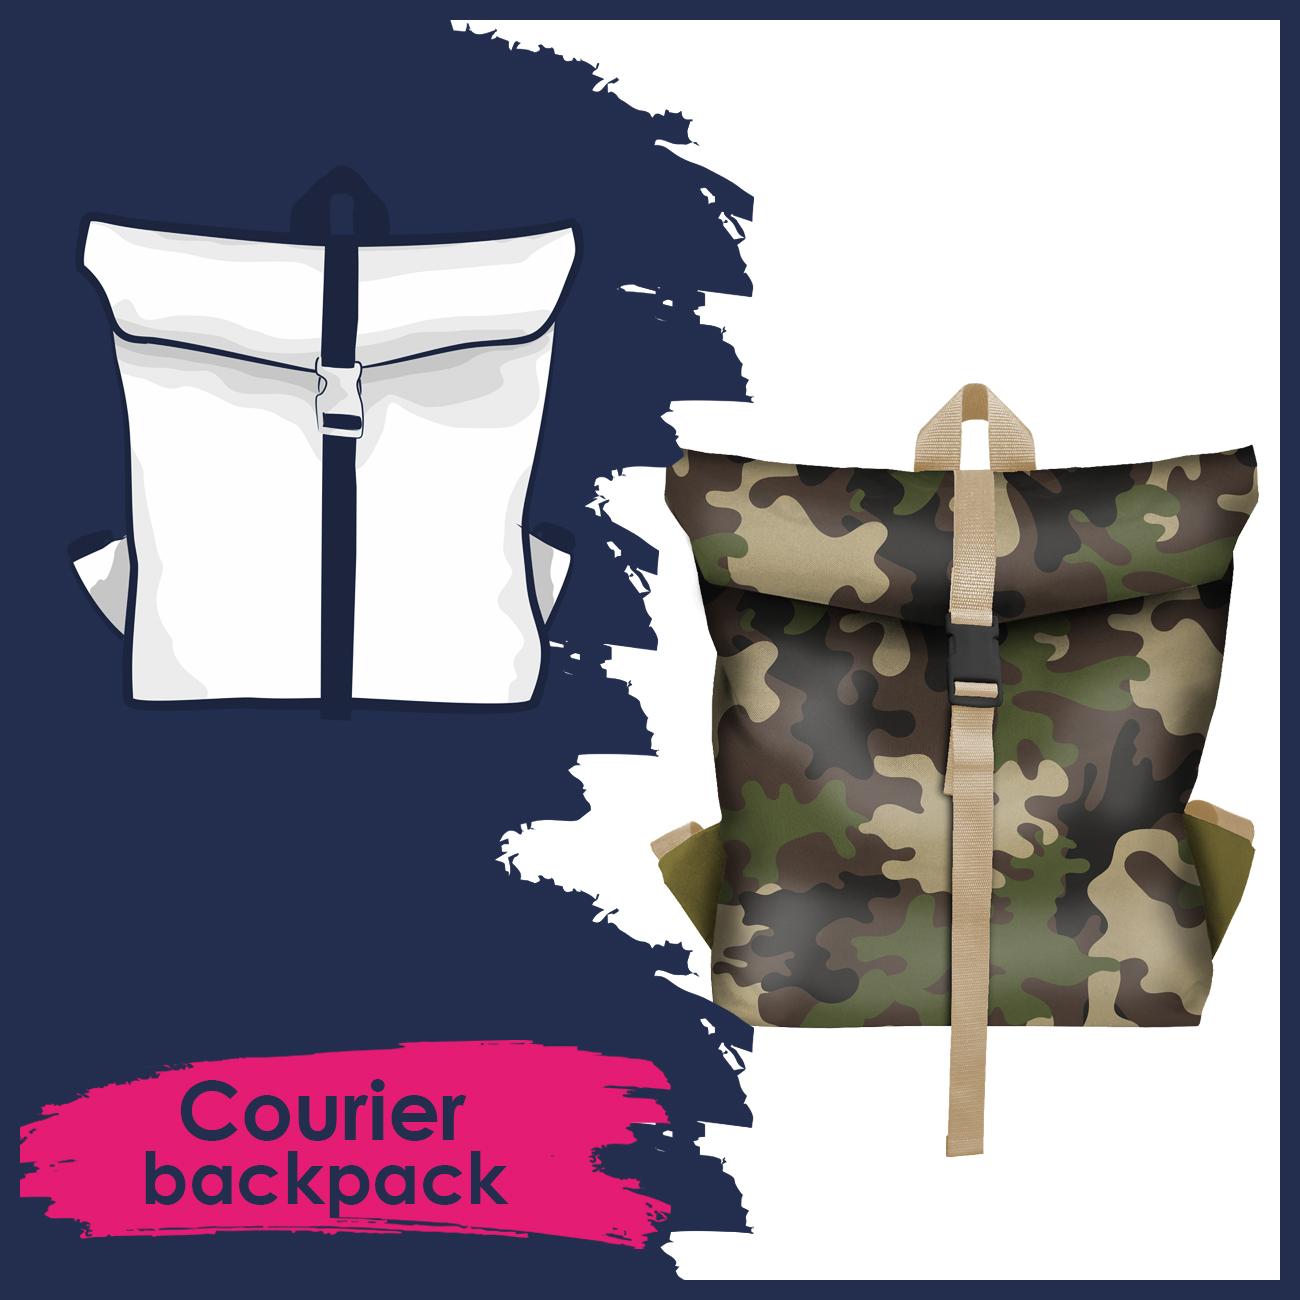 Courier backpack